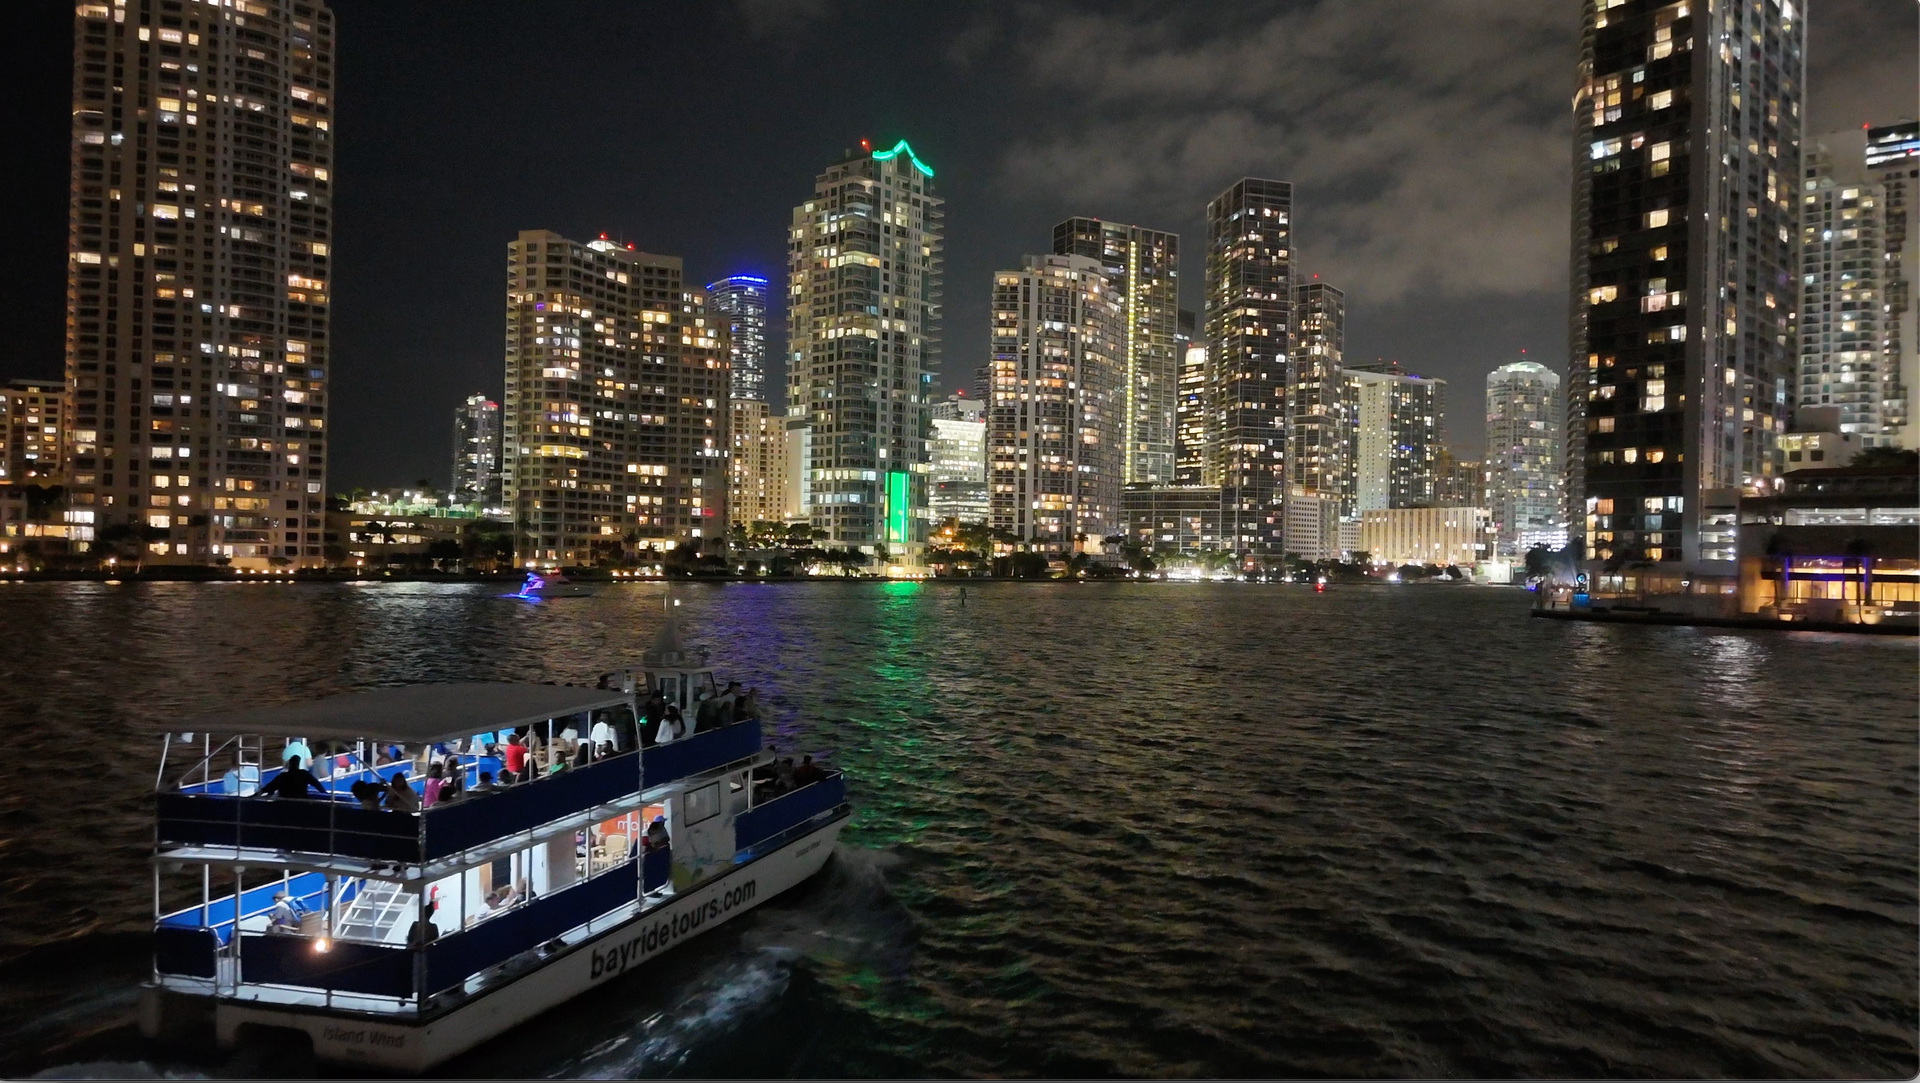 The best Sunset cruise, sunset cruise in the evening time, perfect Miami Boat tour, even during the Night on Biscayne Bay. 